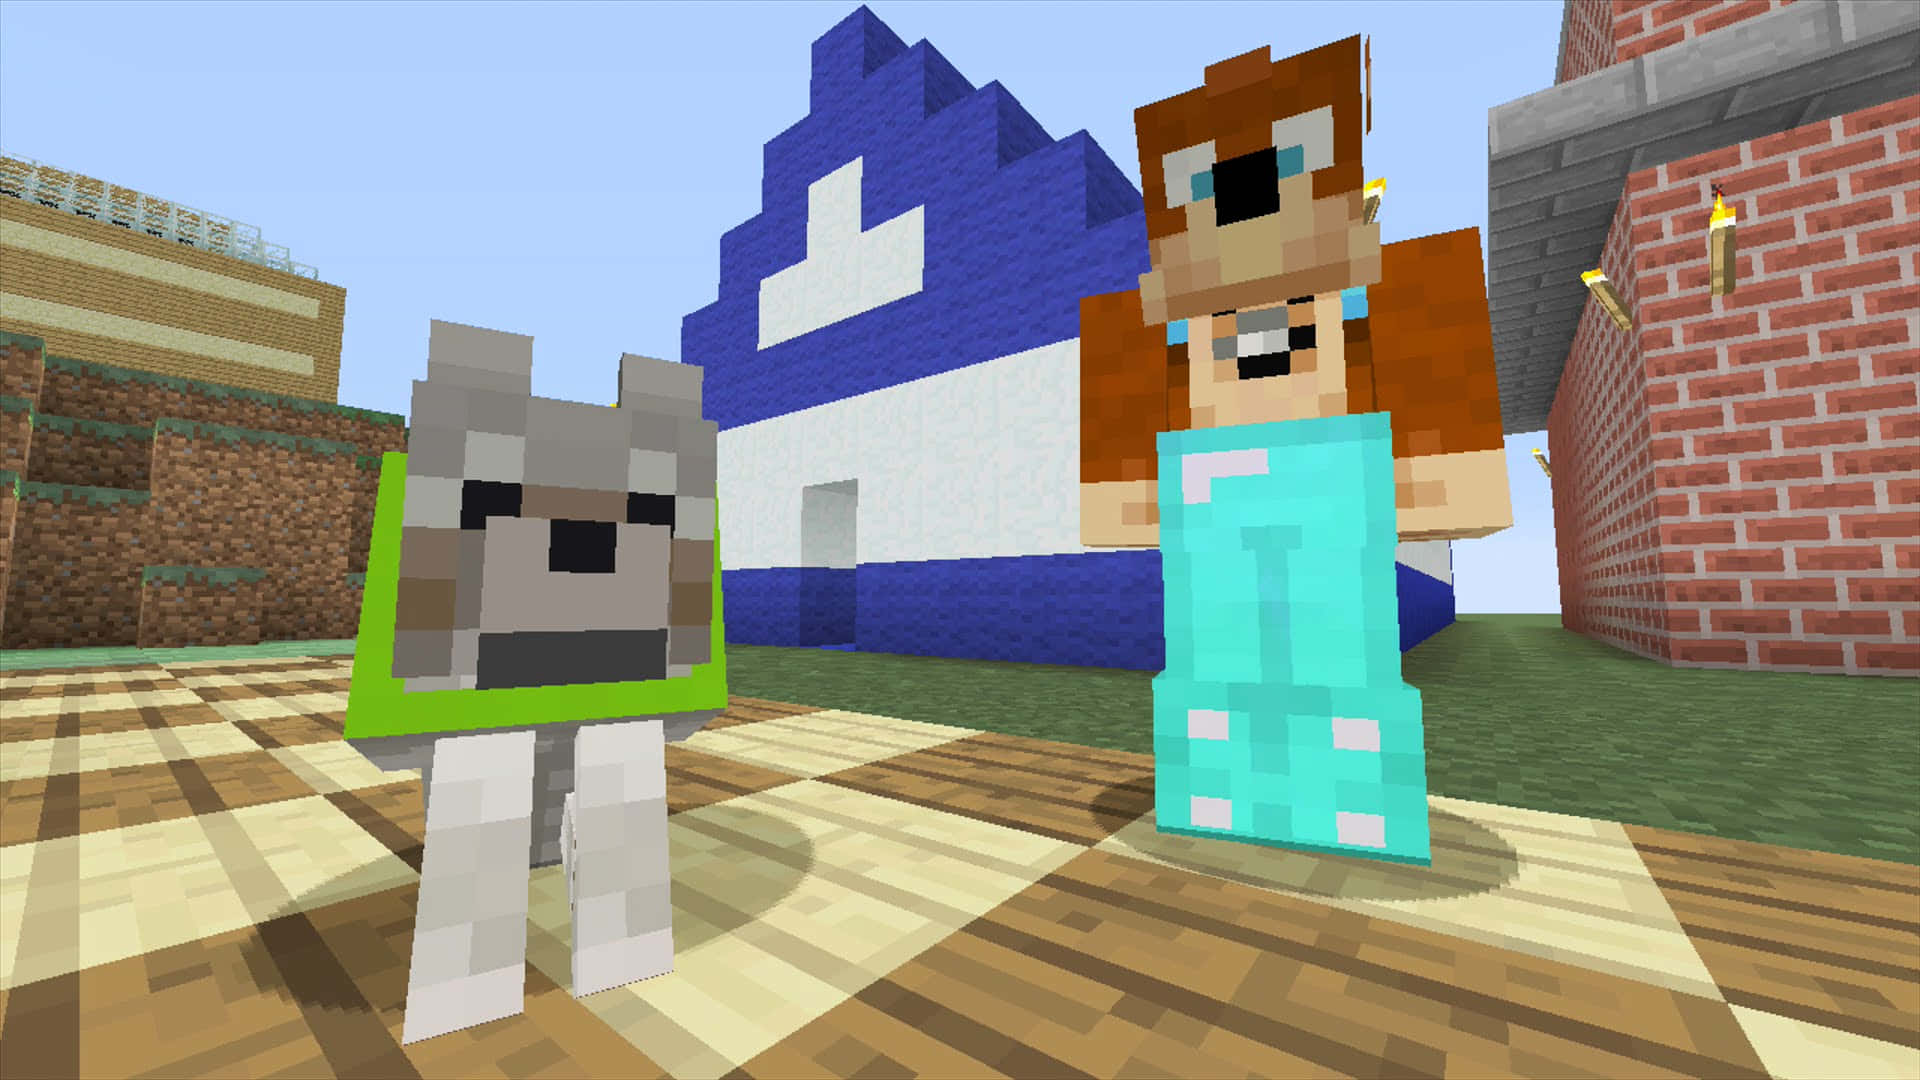 Meet Your New Minecraft Friends - The Five Amazing Pets Wallpaper